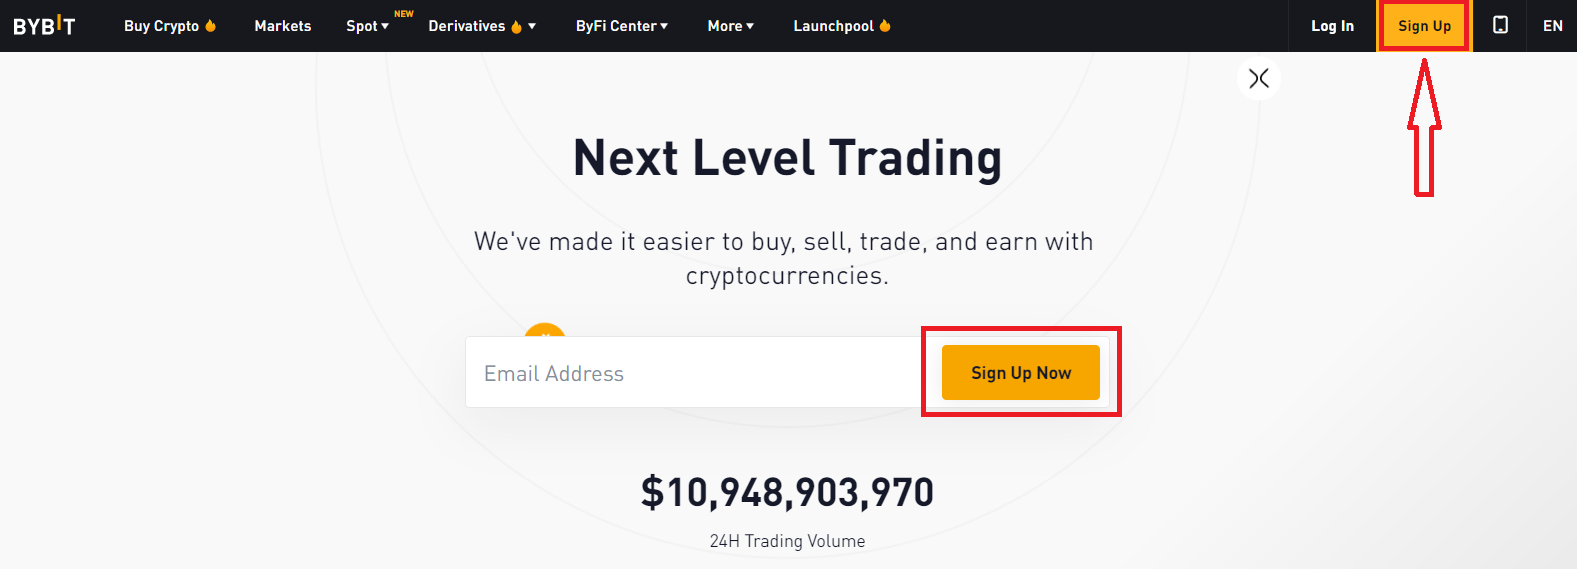 How to Register and Verify Account in Bybit